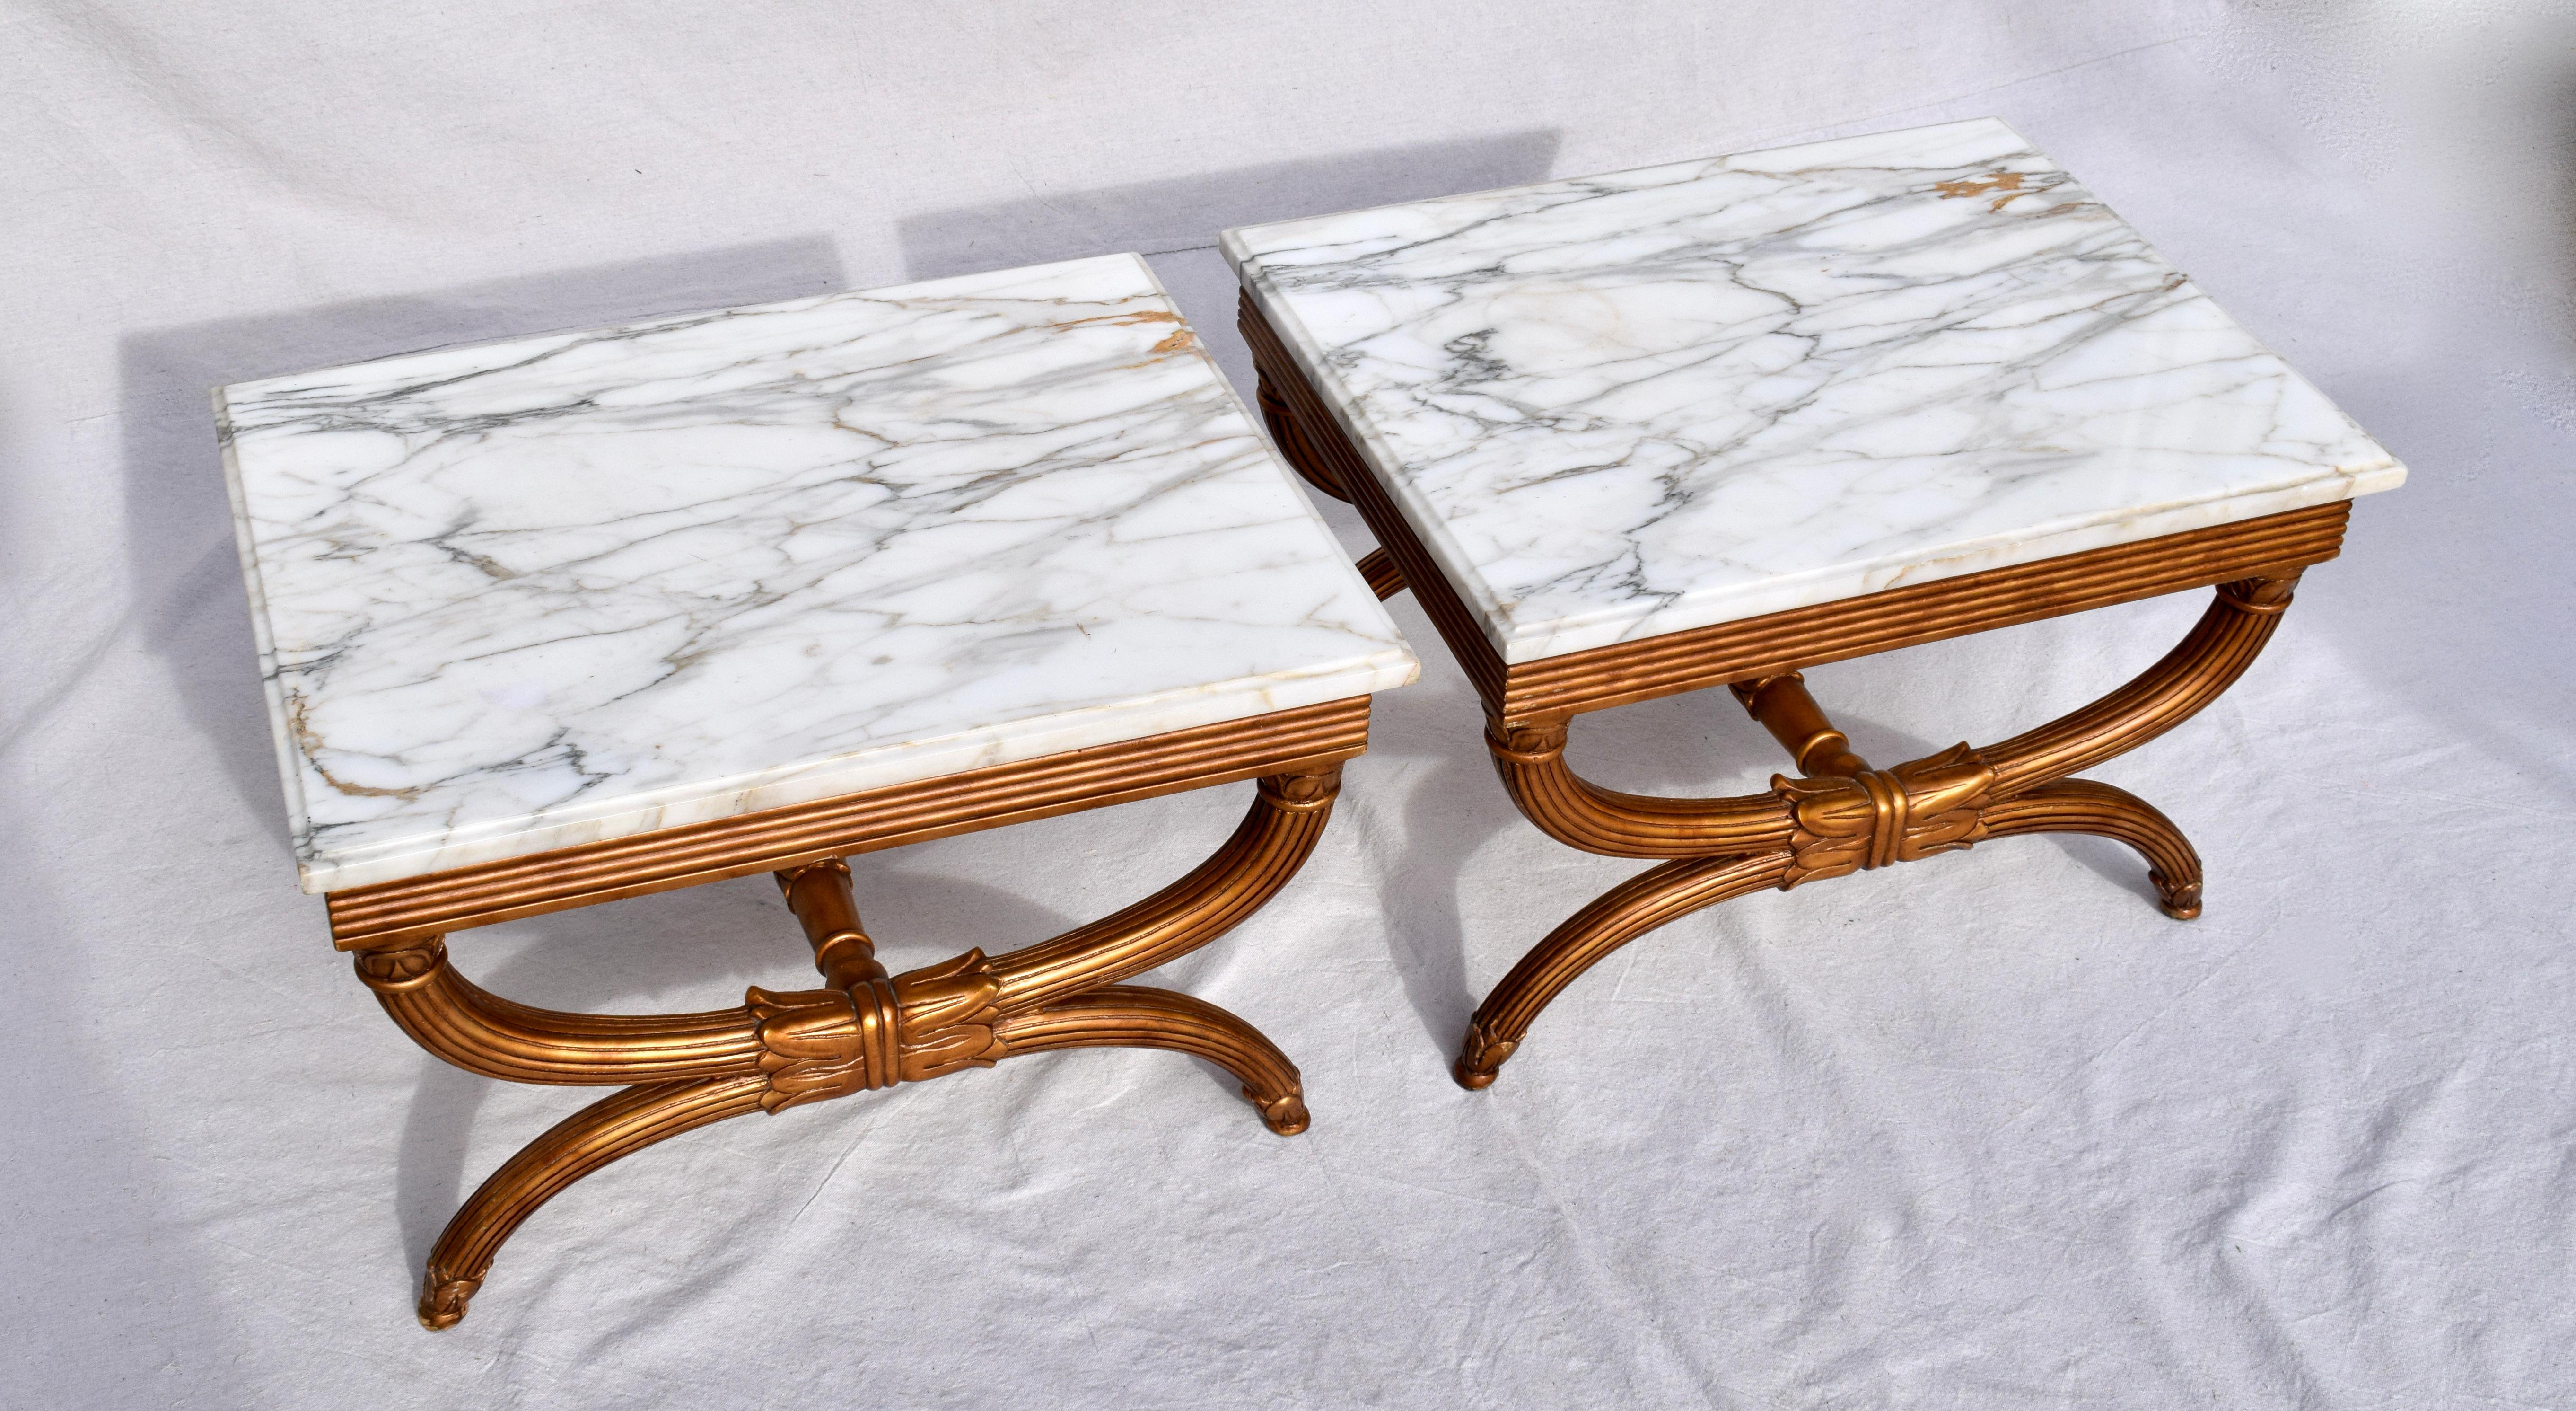 Elegant pair of gold Curule X form tables with stretchers & Carrara marble tops made in Italy; signed. Beautifully maintained original finish. Tops are removable.